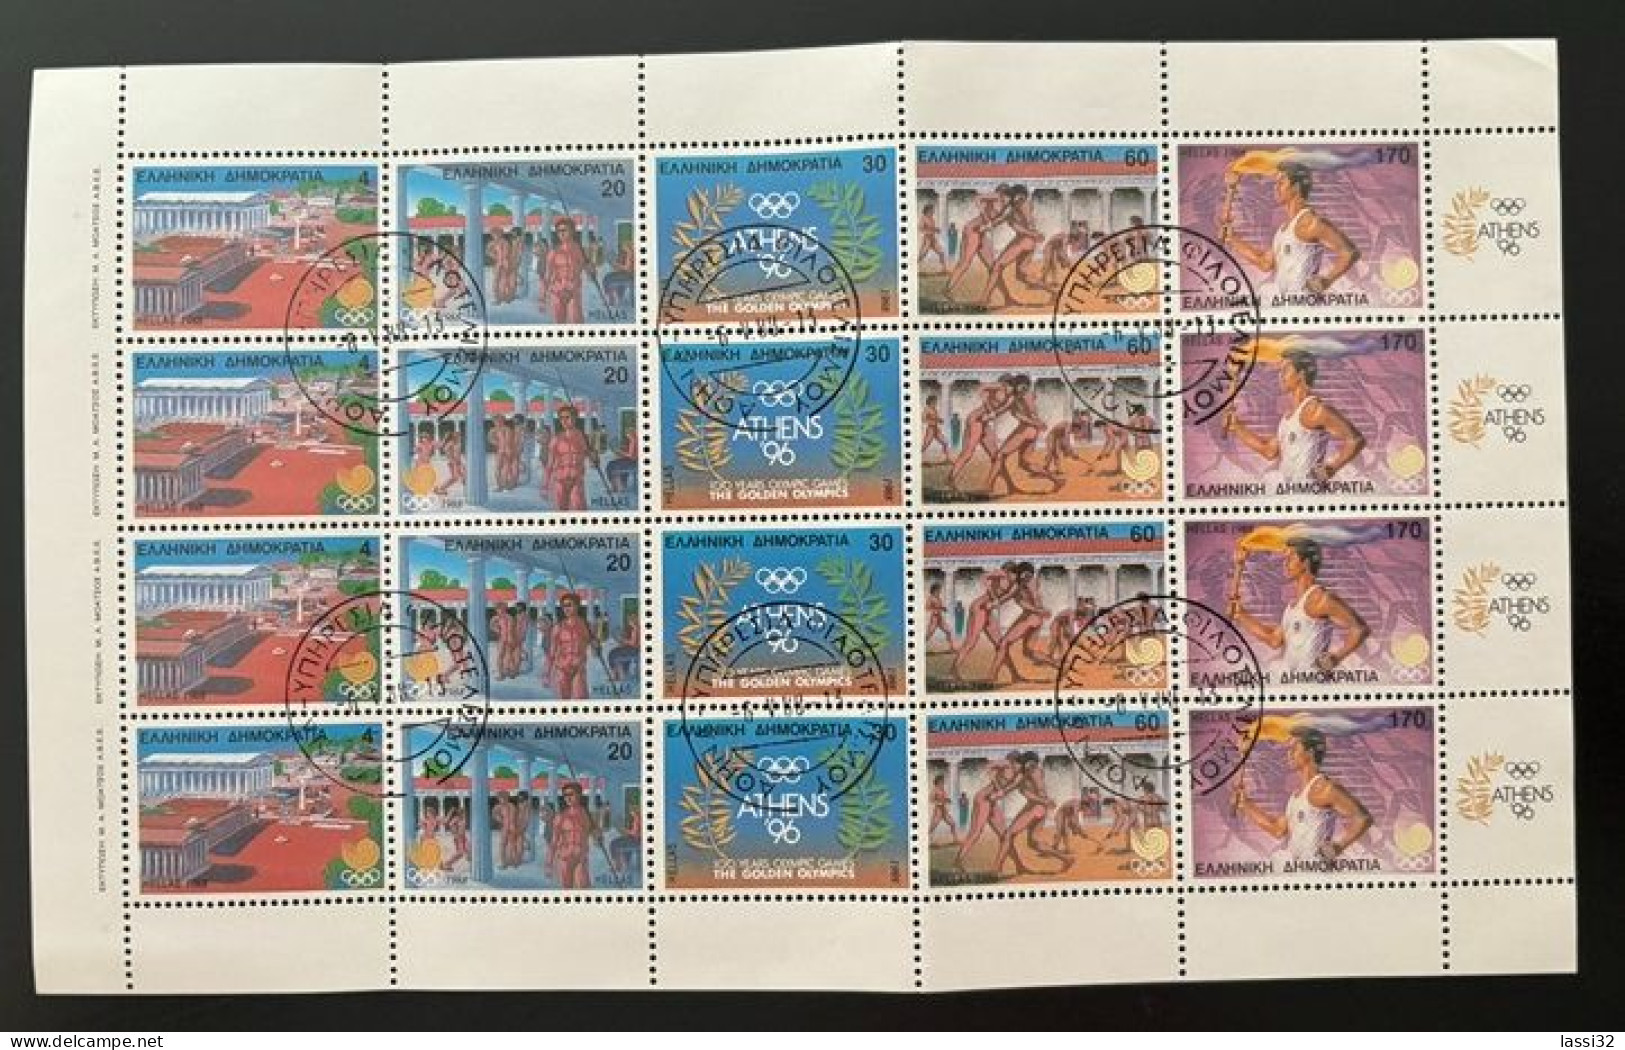 GREECE, 1988, Seoul Olympic Games Sheet, USED (FOLED) - Oblitérés